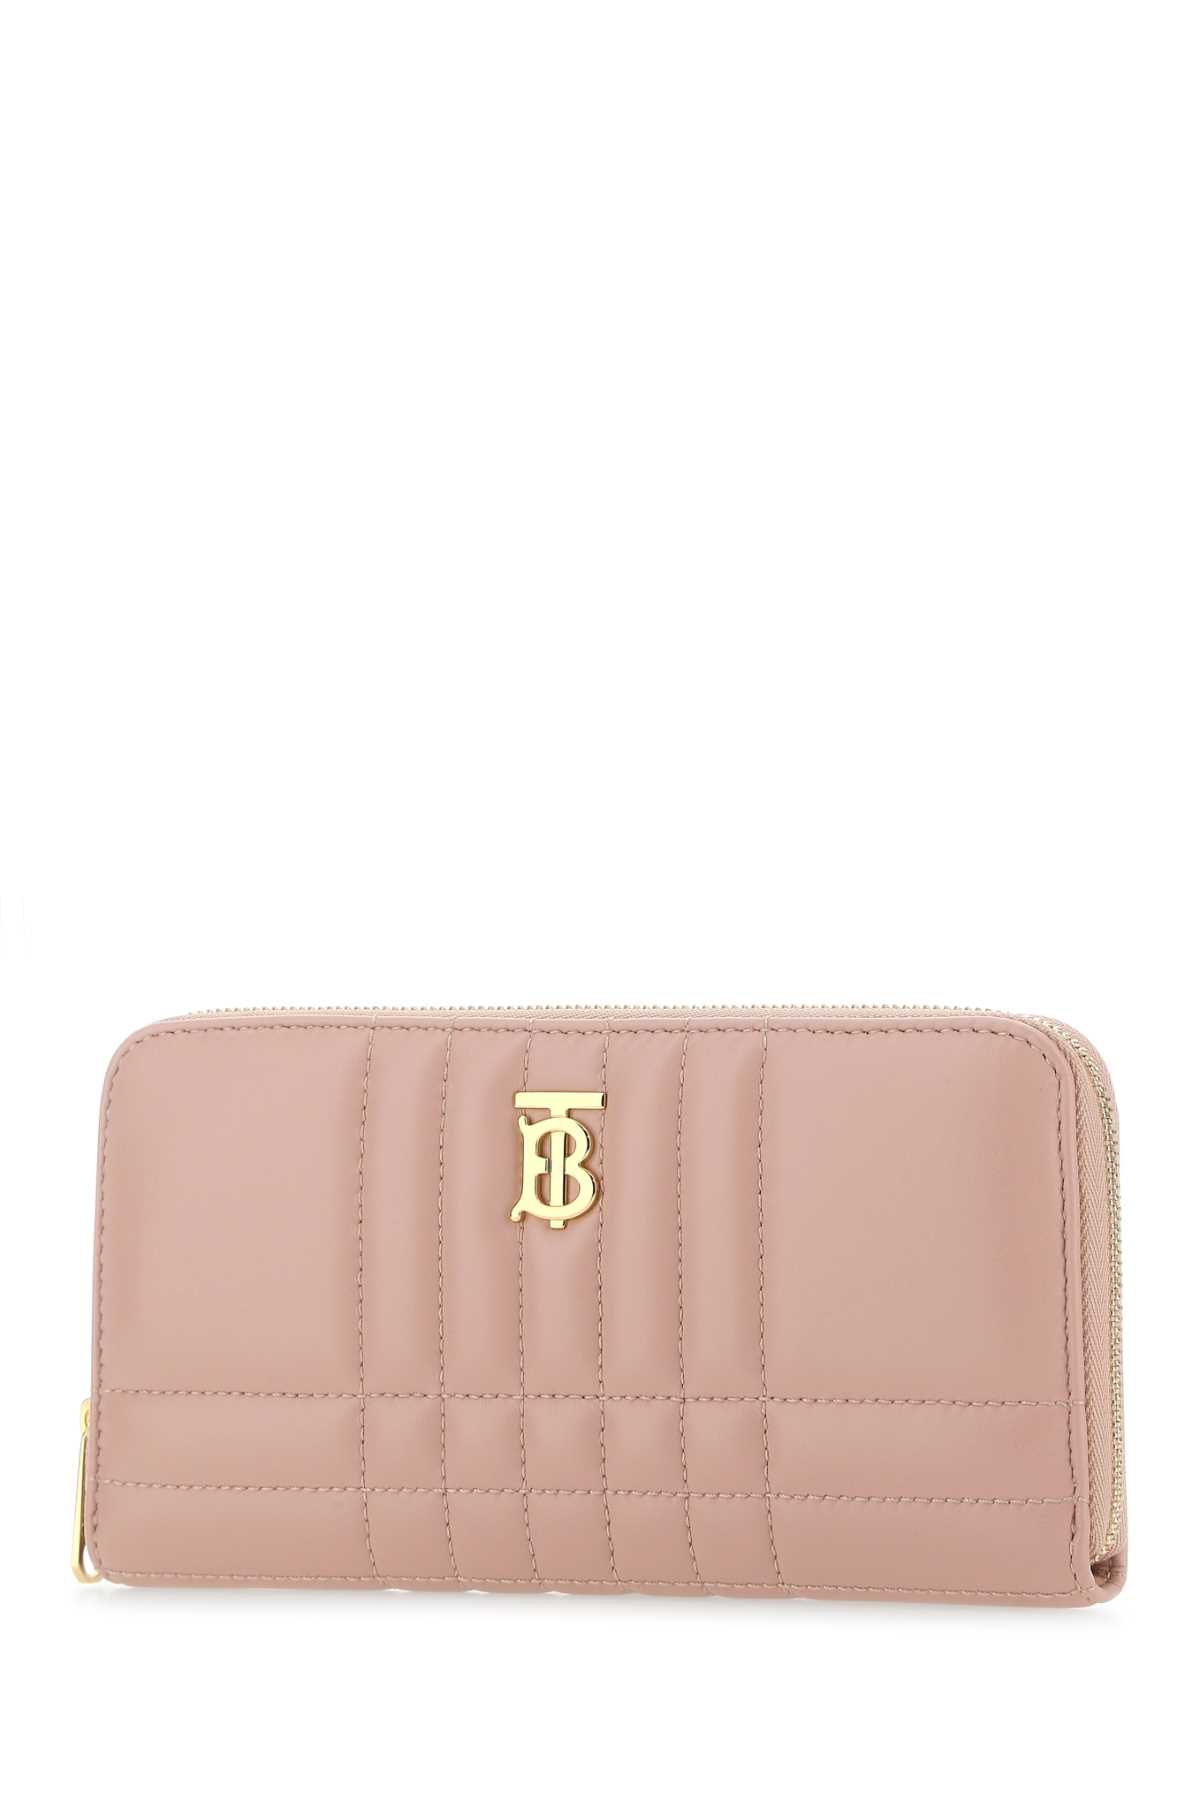 Shop Burberry Pink Nappa Leather Lola Wallet In A3661